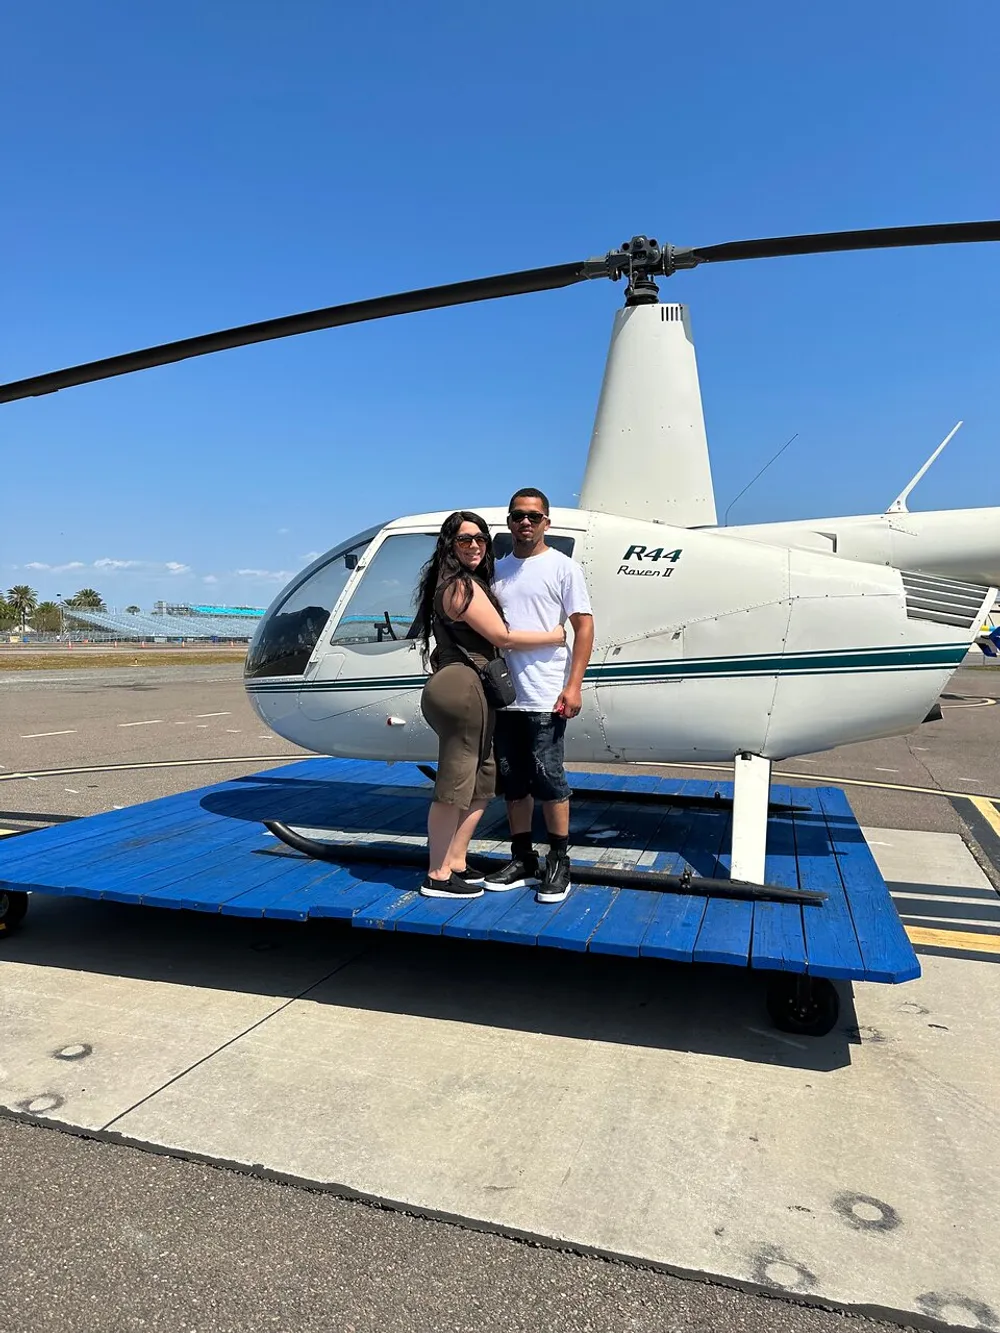 Two people are posing for a photo in front of a white R44 Raven II helicopter on a sunny day